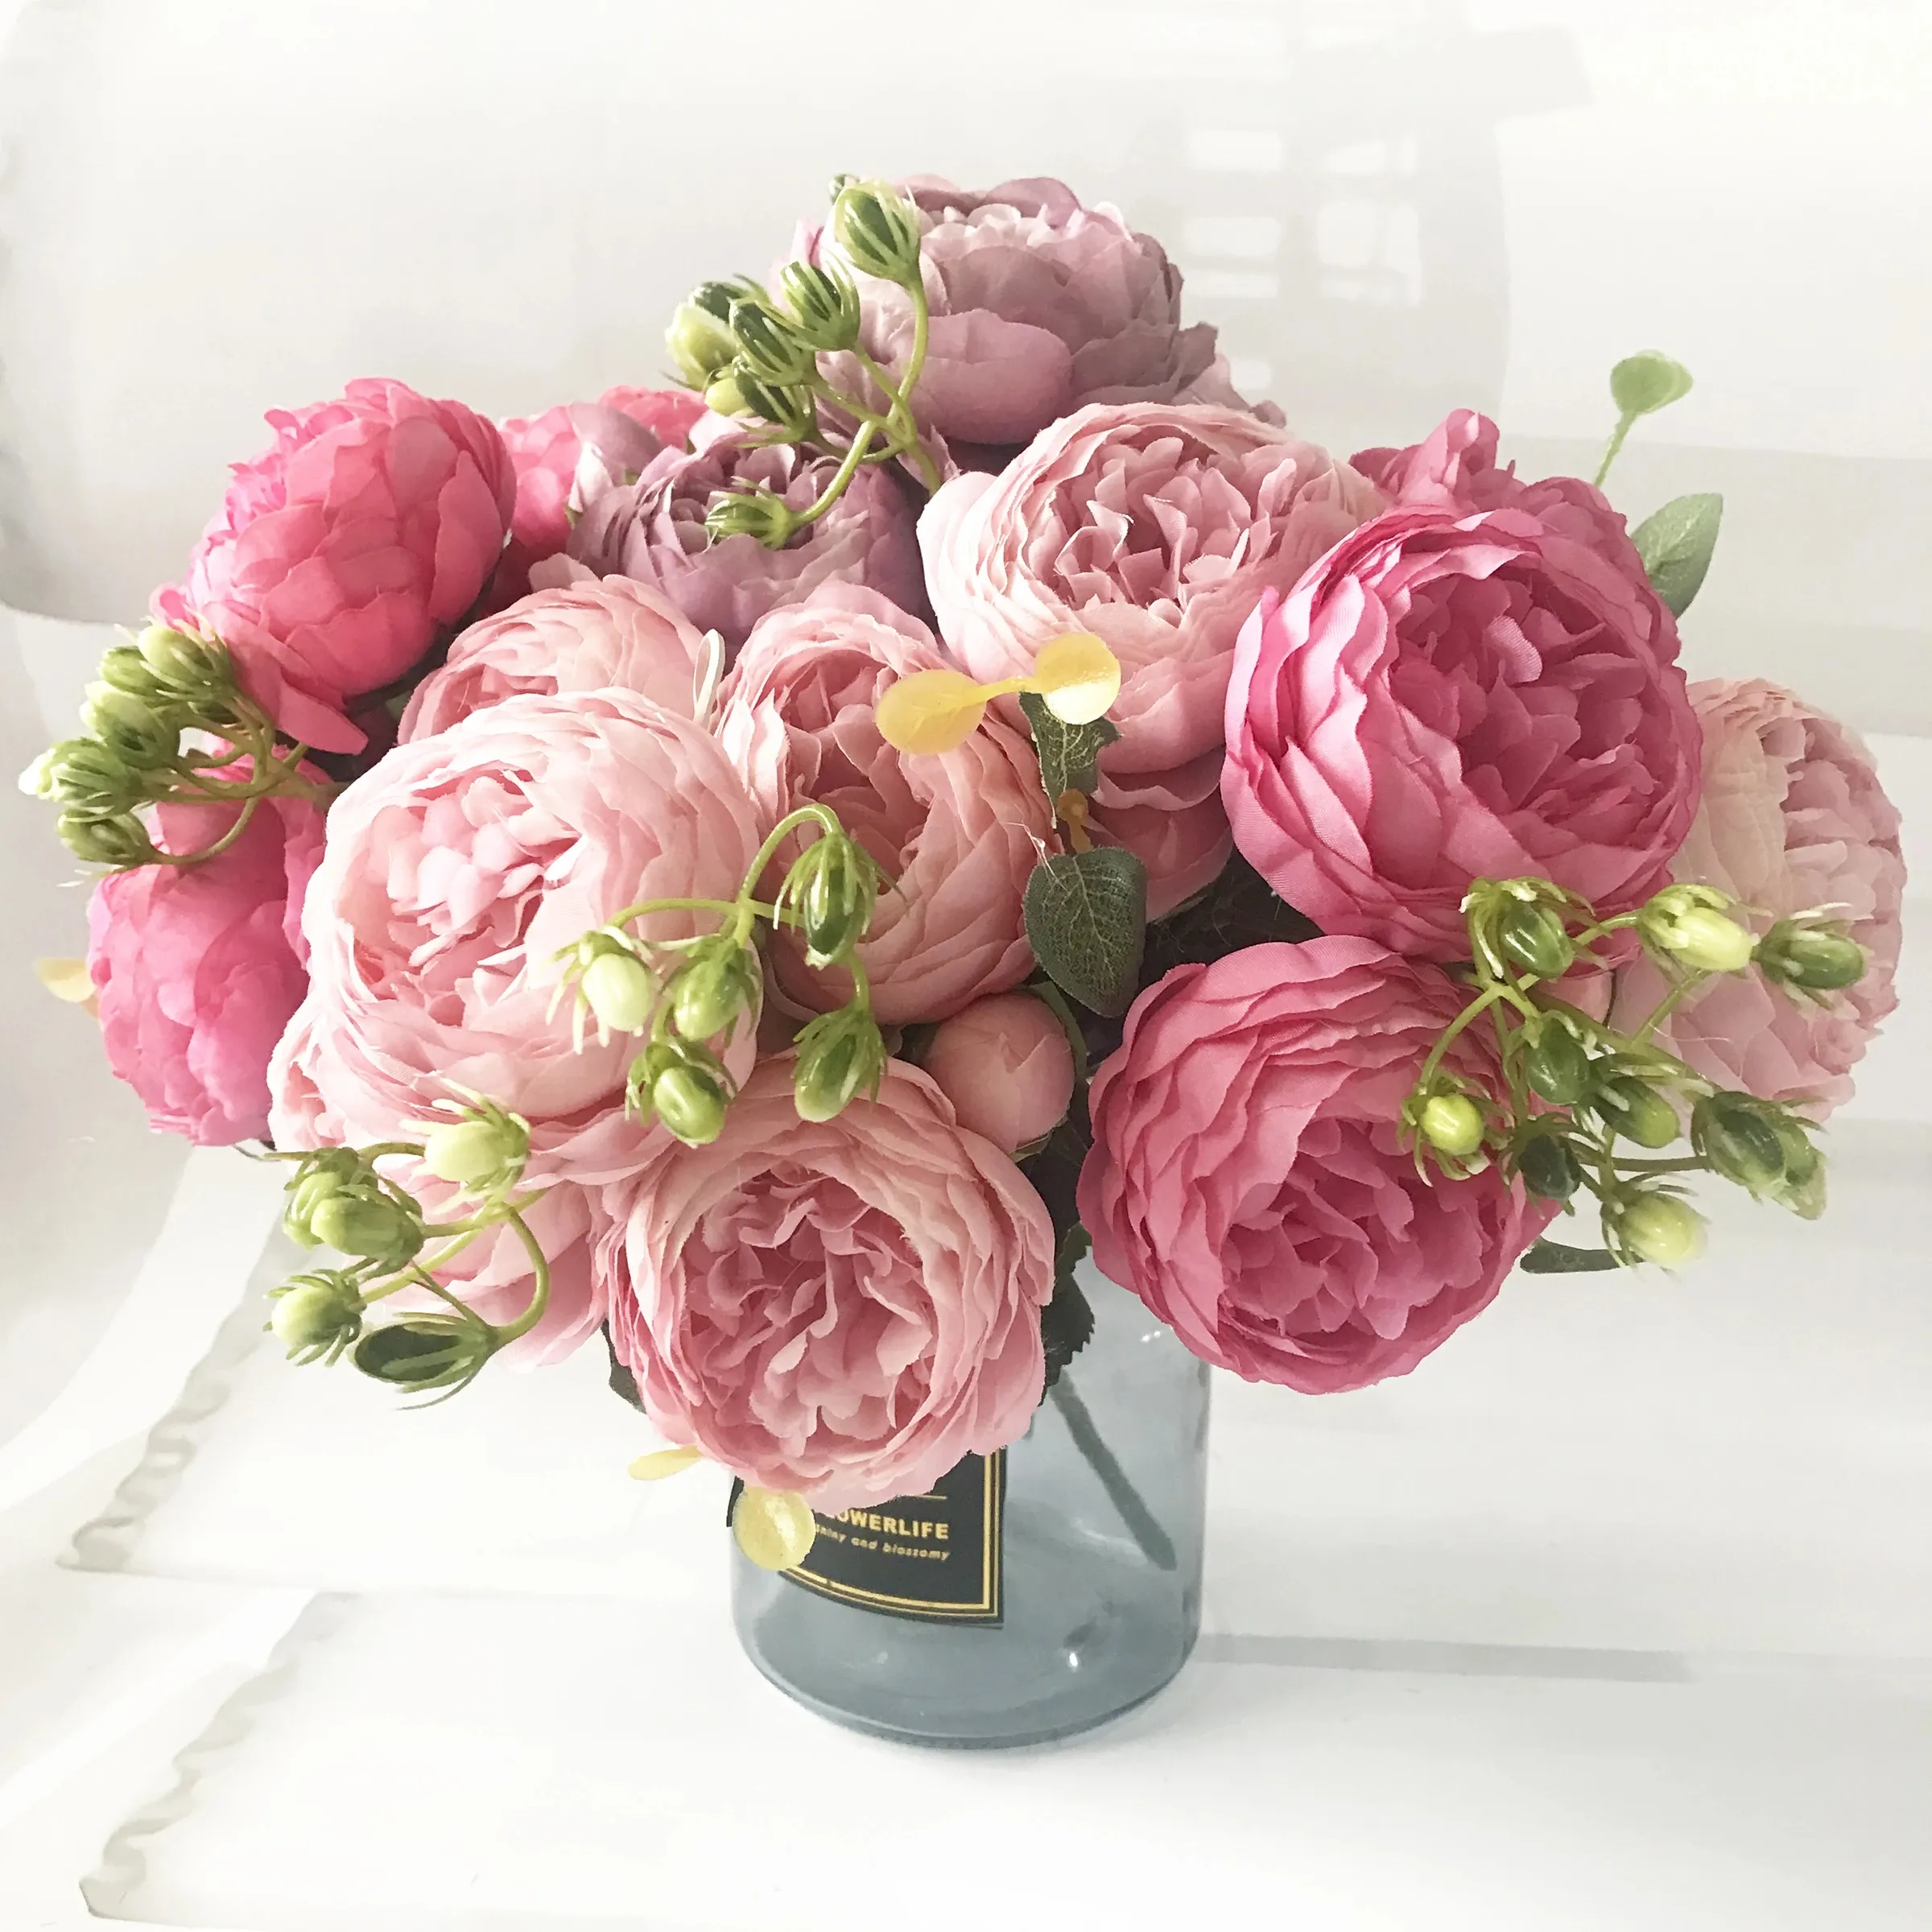 30cm Rose Pink Silk Peony Artificial Flowers Bouquet 5 Big Head and 4 Bud Cheap Fake Flowers for Home Indoor Wedding Decoration